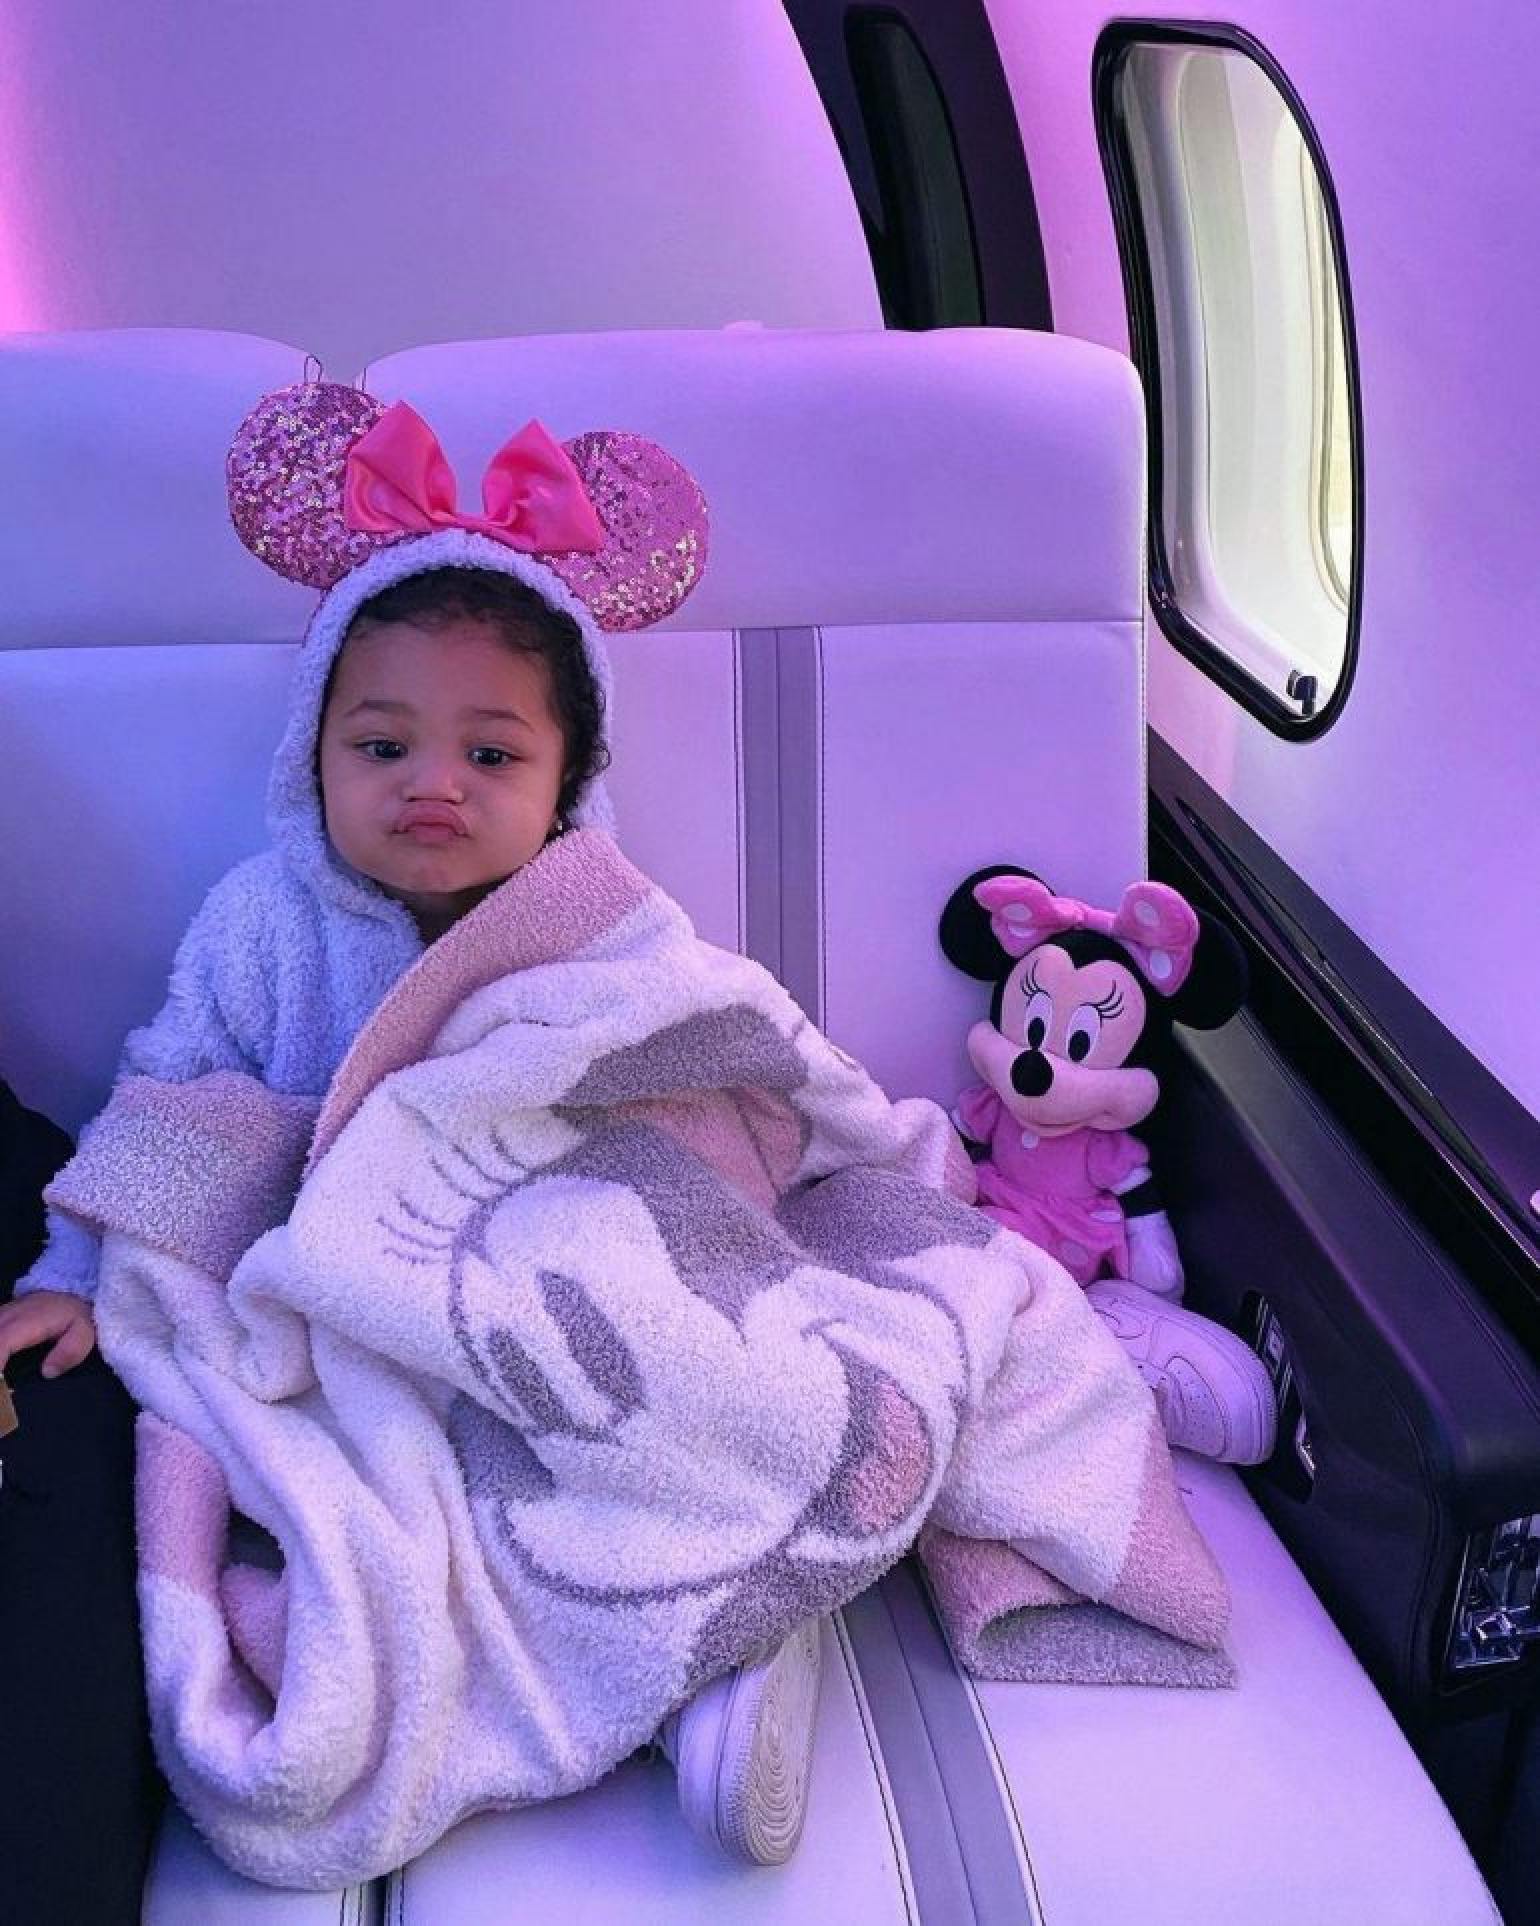 4 ways Kylie Jenner loves spoiling daughter Stormi, from visits to  Disneyland by US$77 million private jet to Nike SB Dunk Low Travis Scott  sneakers and designer clothes